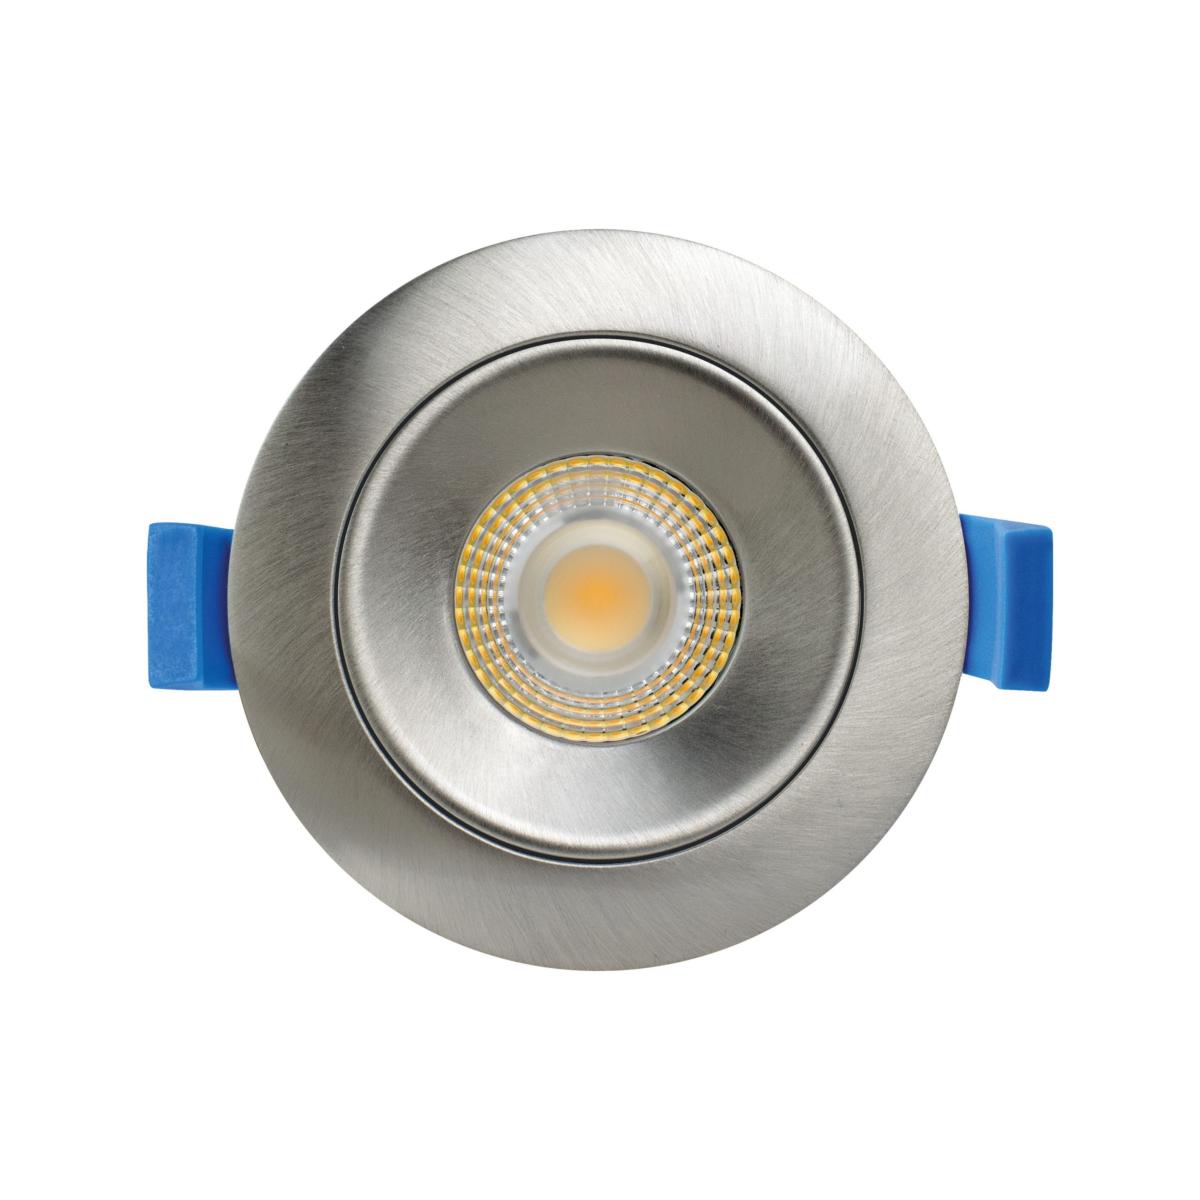 Spot LED extra-plat dimmable recouvrable isolant ARIC 5W 36° 220V Aspen  50747.